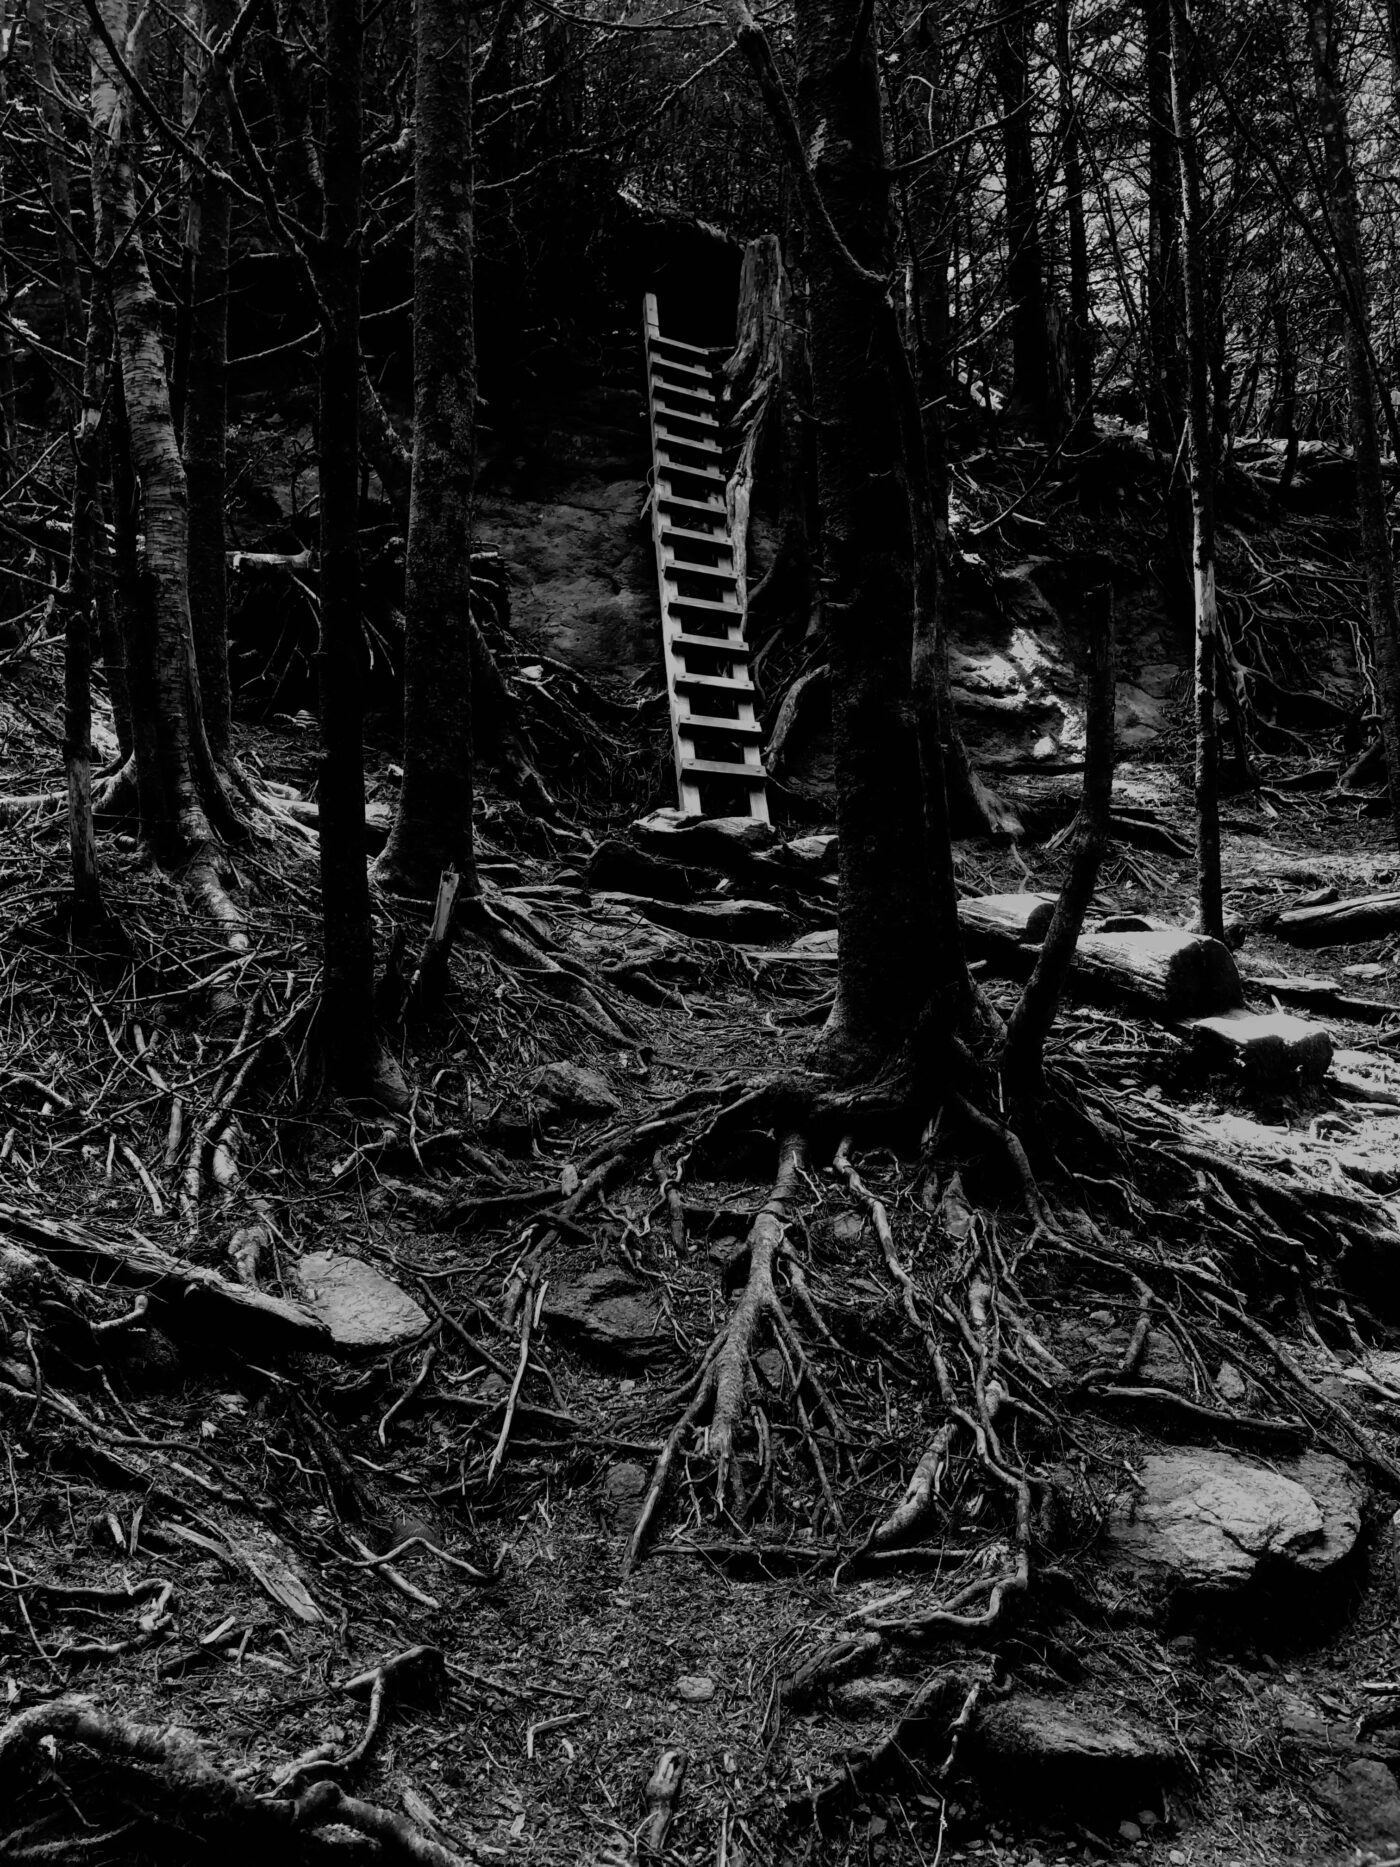 Scene in a forest with exposed roots and a ladder that connects a hilly area. Black-and-white image taken in Asheville, North Carolina.